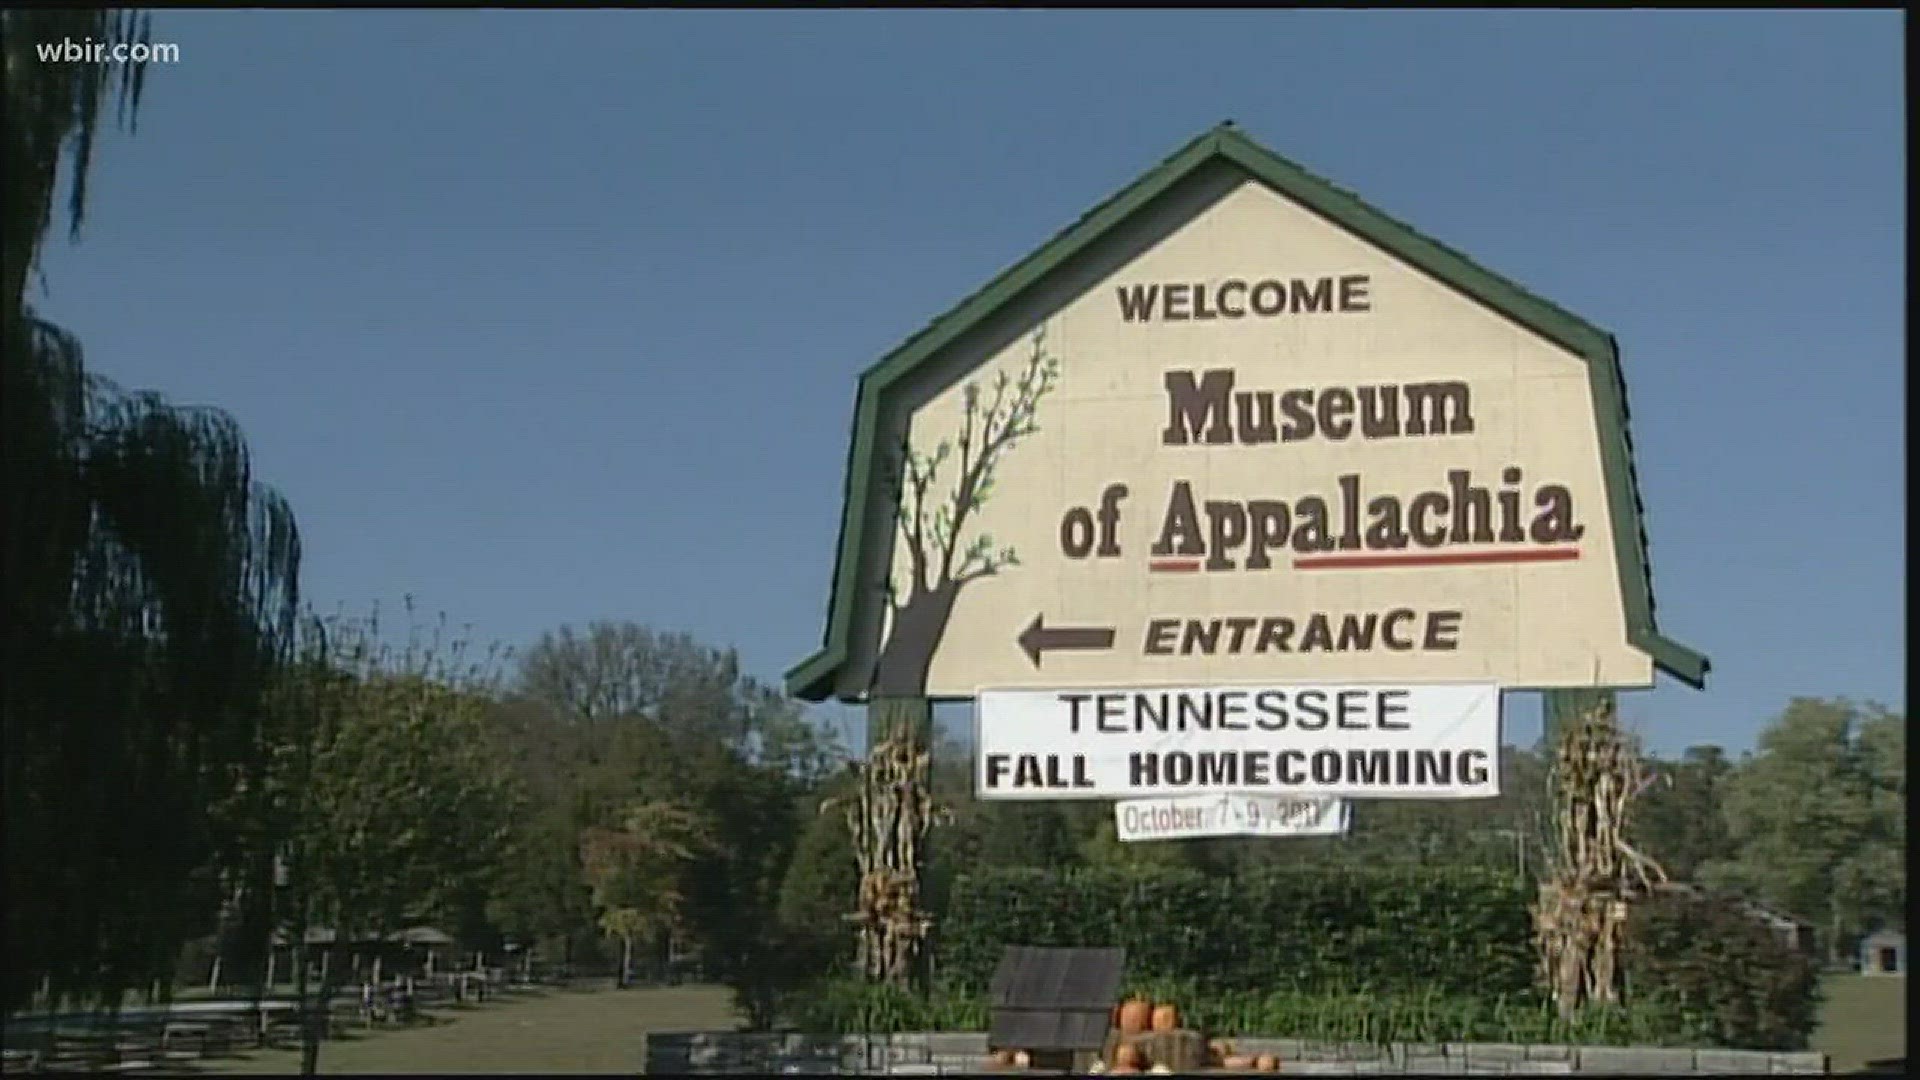 Dec. 12, 2017: Museum of Appalachia President Elaine Meyer remembers the best moments from Tennessee Fall Homecoming, which is ending after a 38-year run.